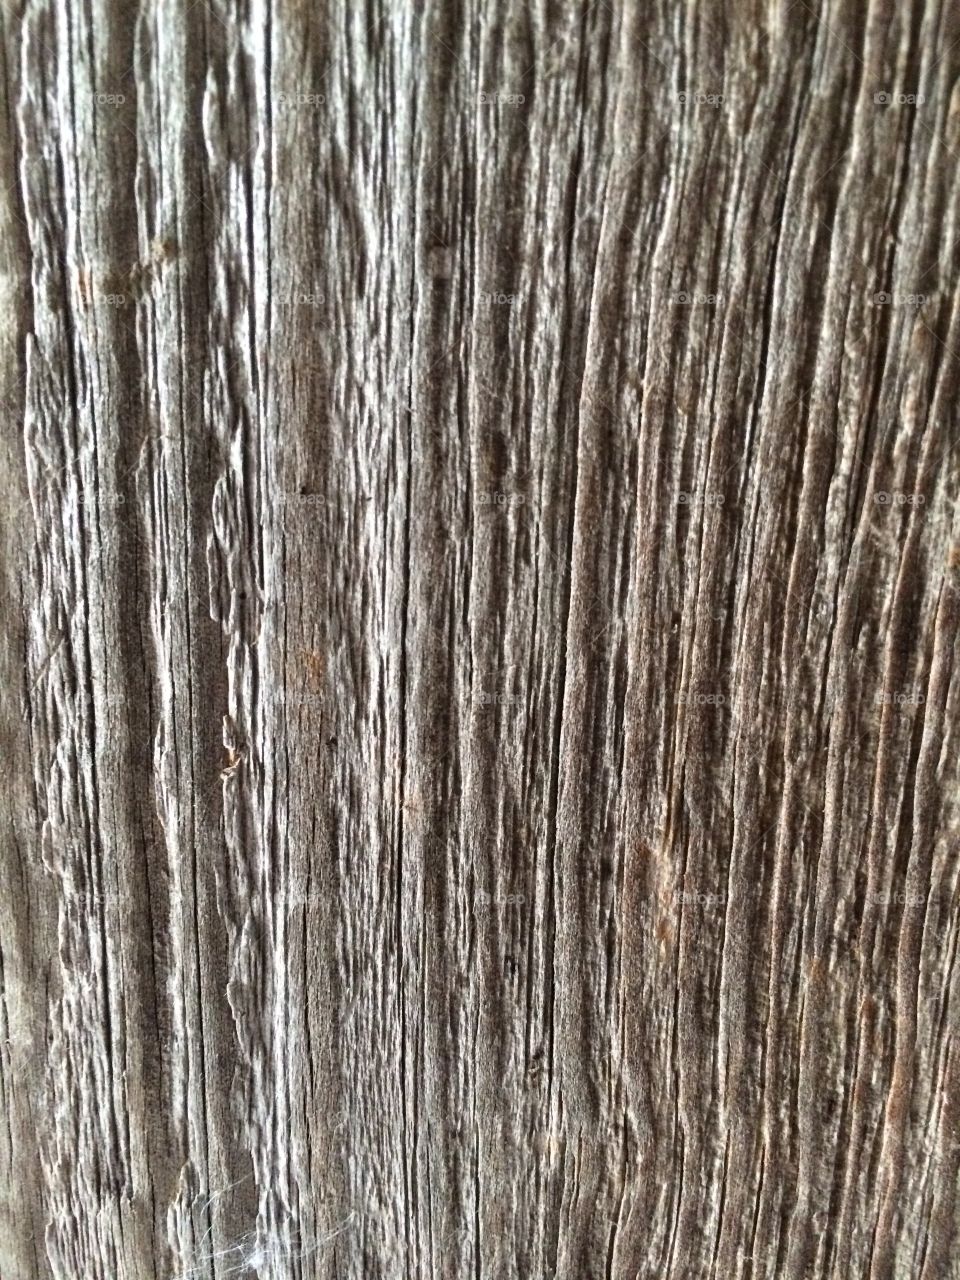 Wooden wall. Old wood